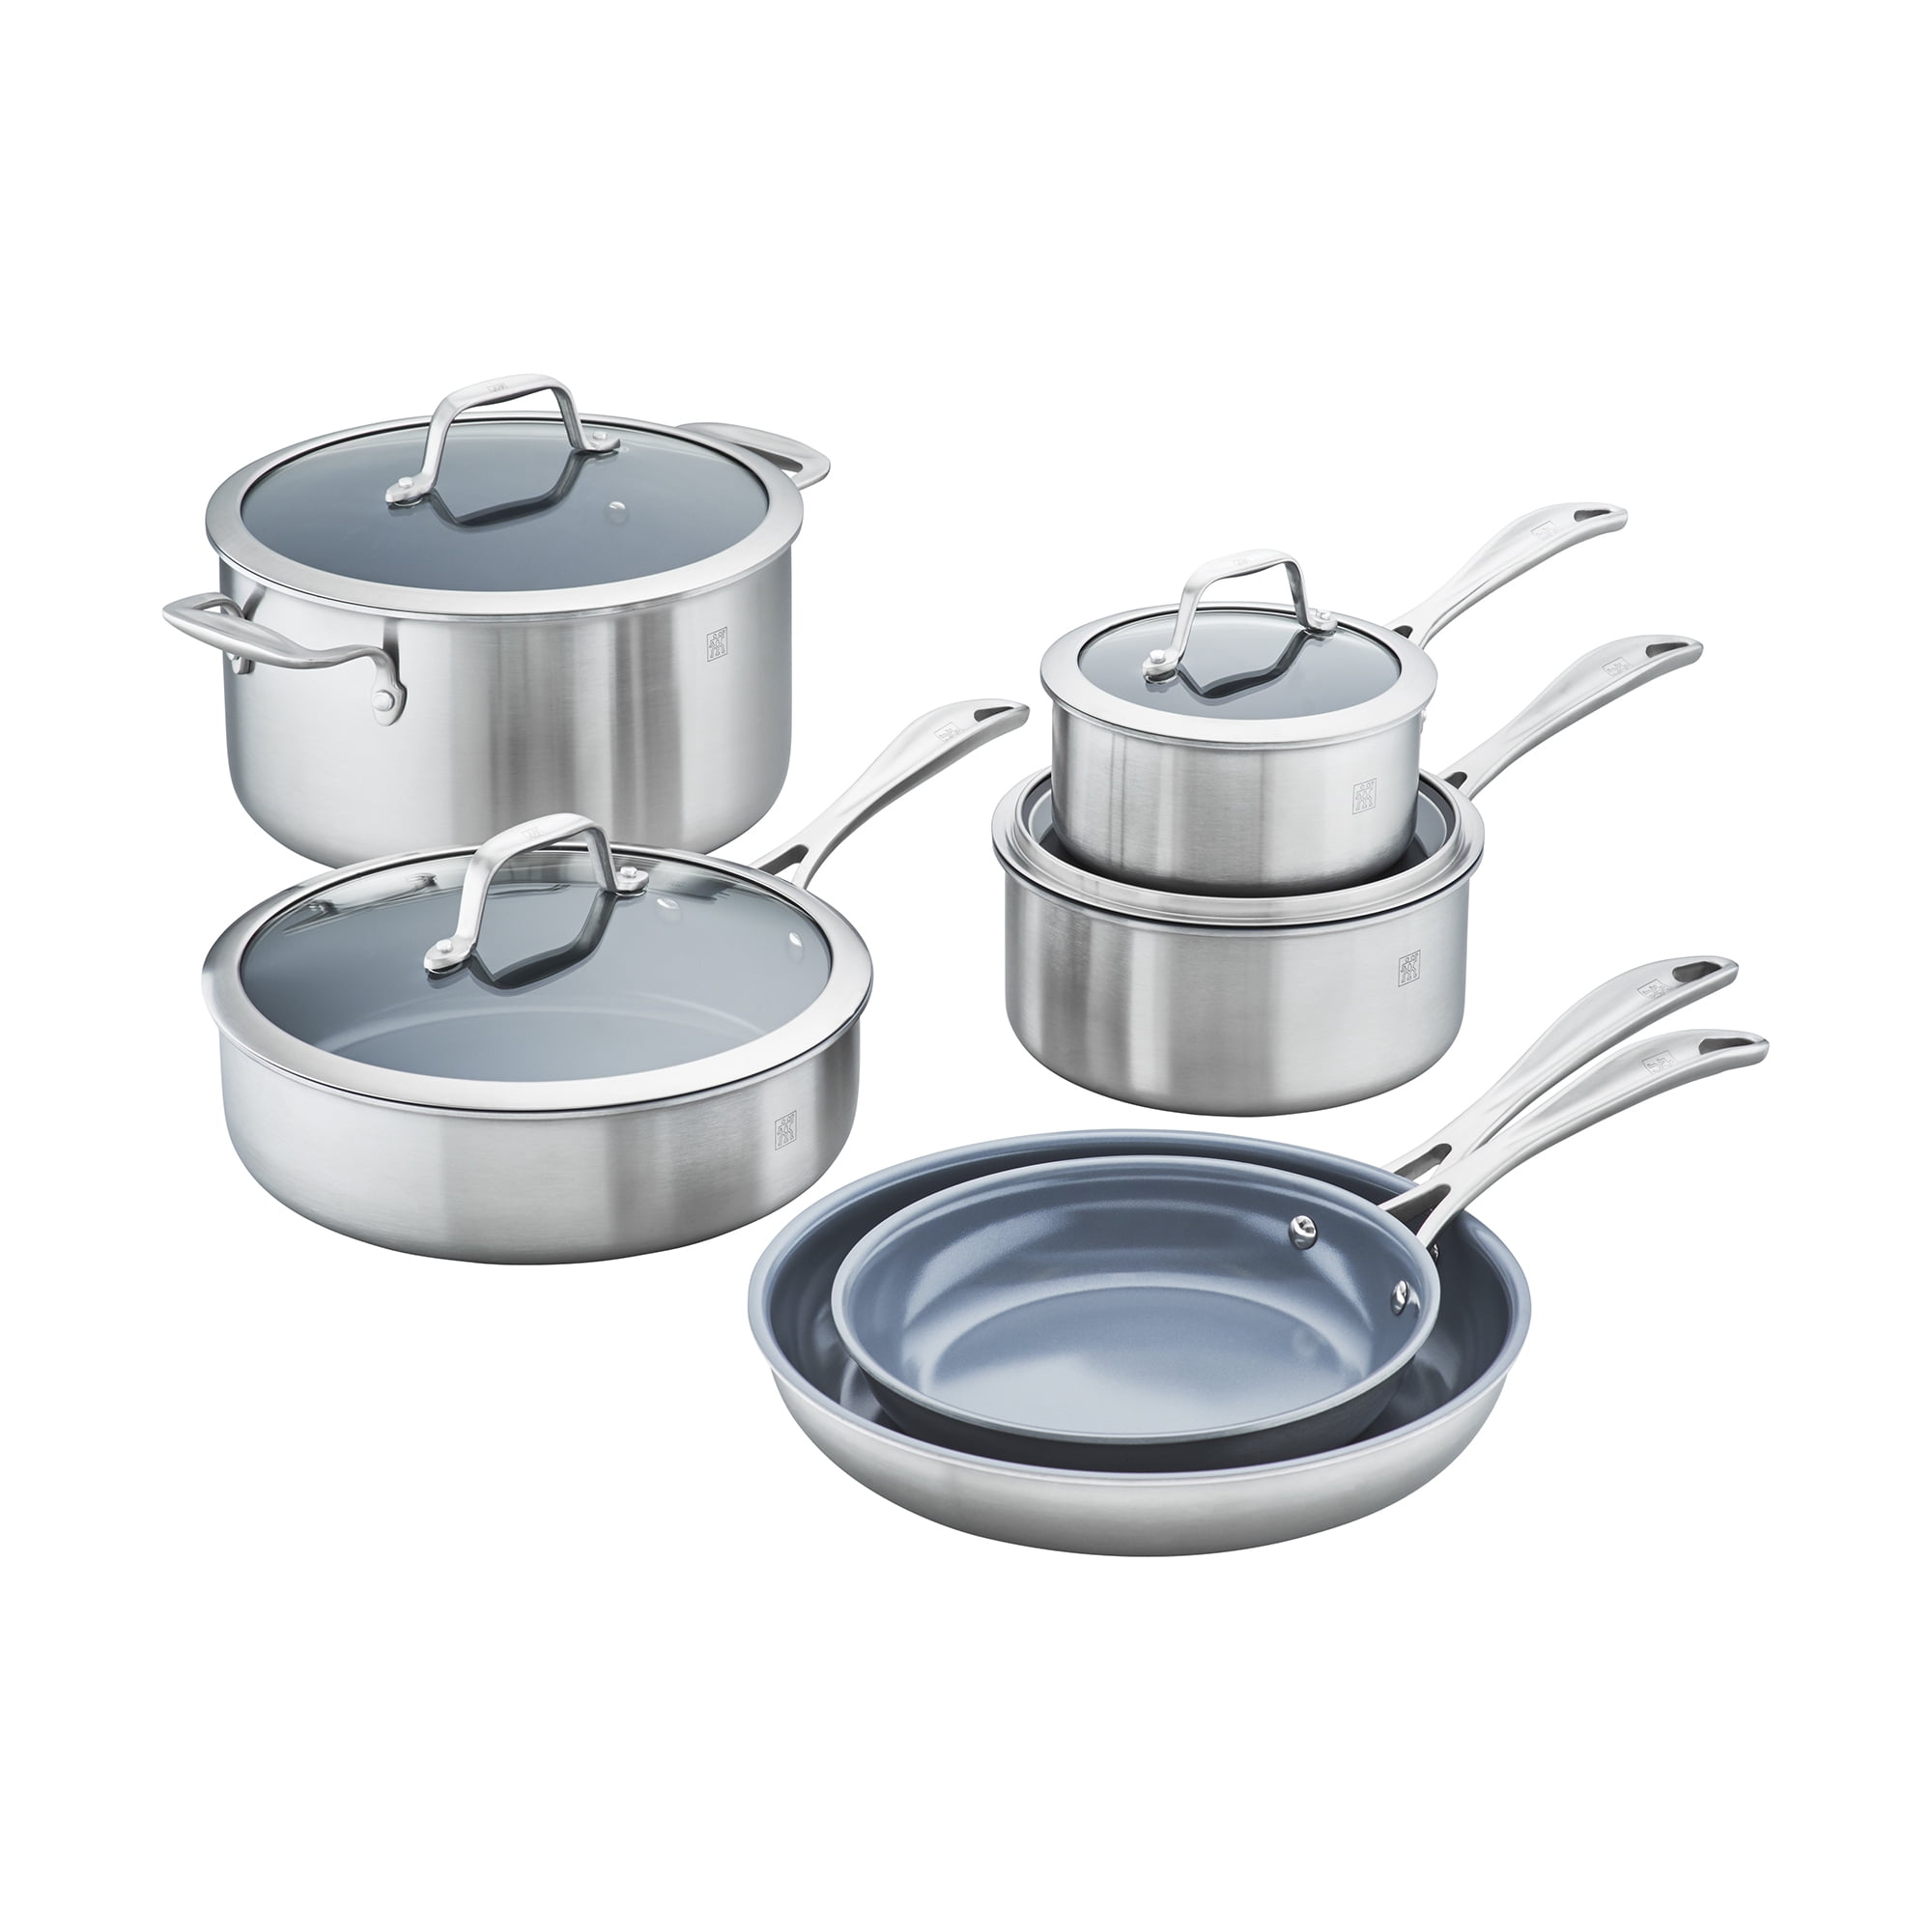 Stainless Steel Pots and Pans Set, Induction Cookware 4-Piece with Lid,  Cookware Sets for Oven & Dishwasher Safe By MOMOSTAR